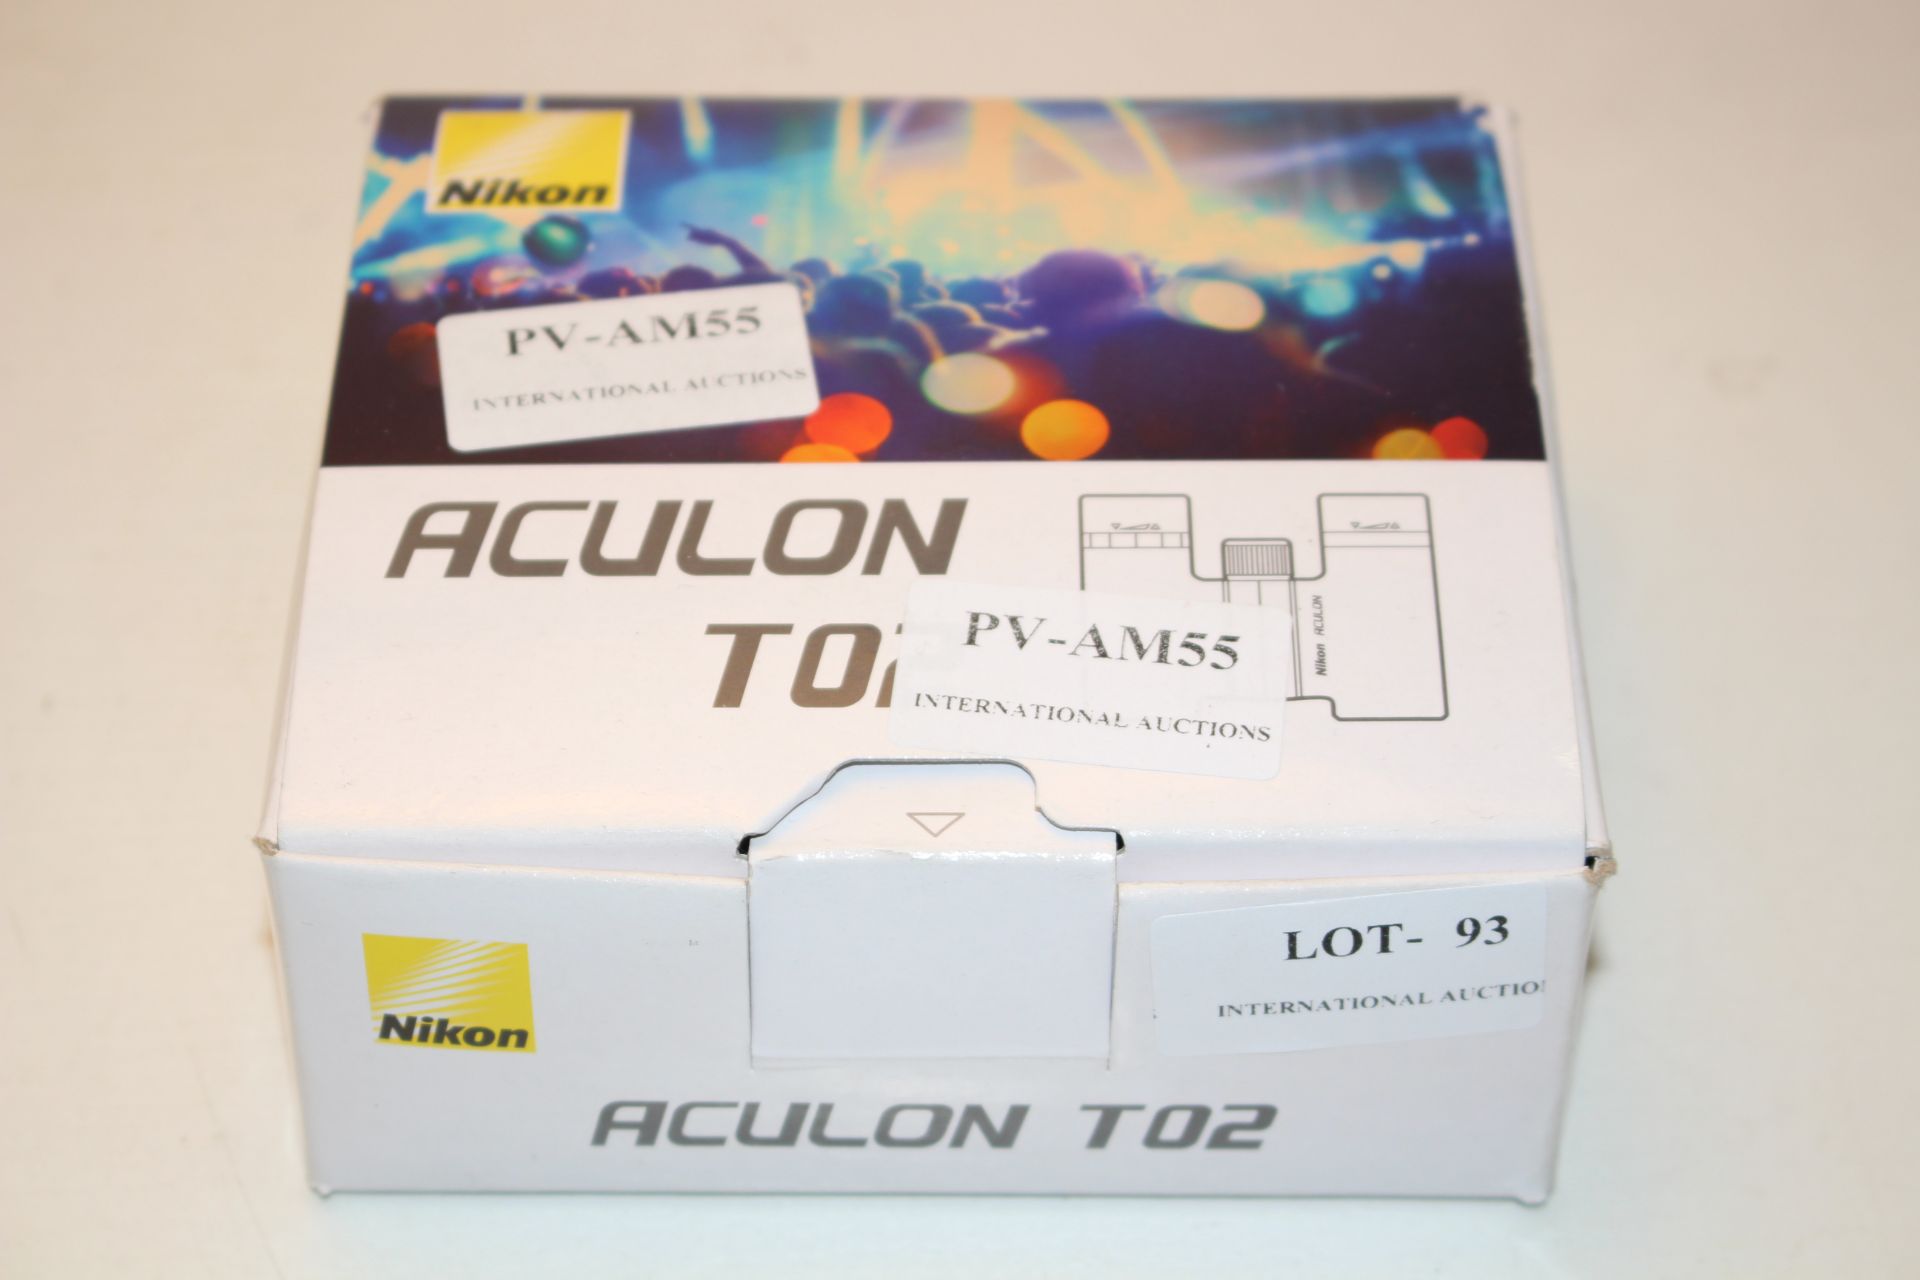 BOXED NIKON ACULON T02 SLIM COMPACT BINOCULARS RRP £59.99Condition ReportAppraisal Available on